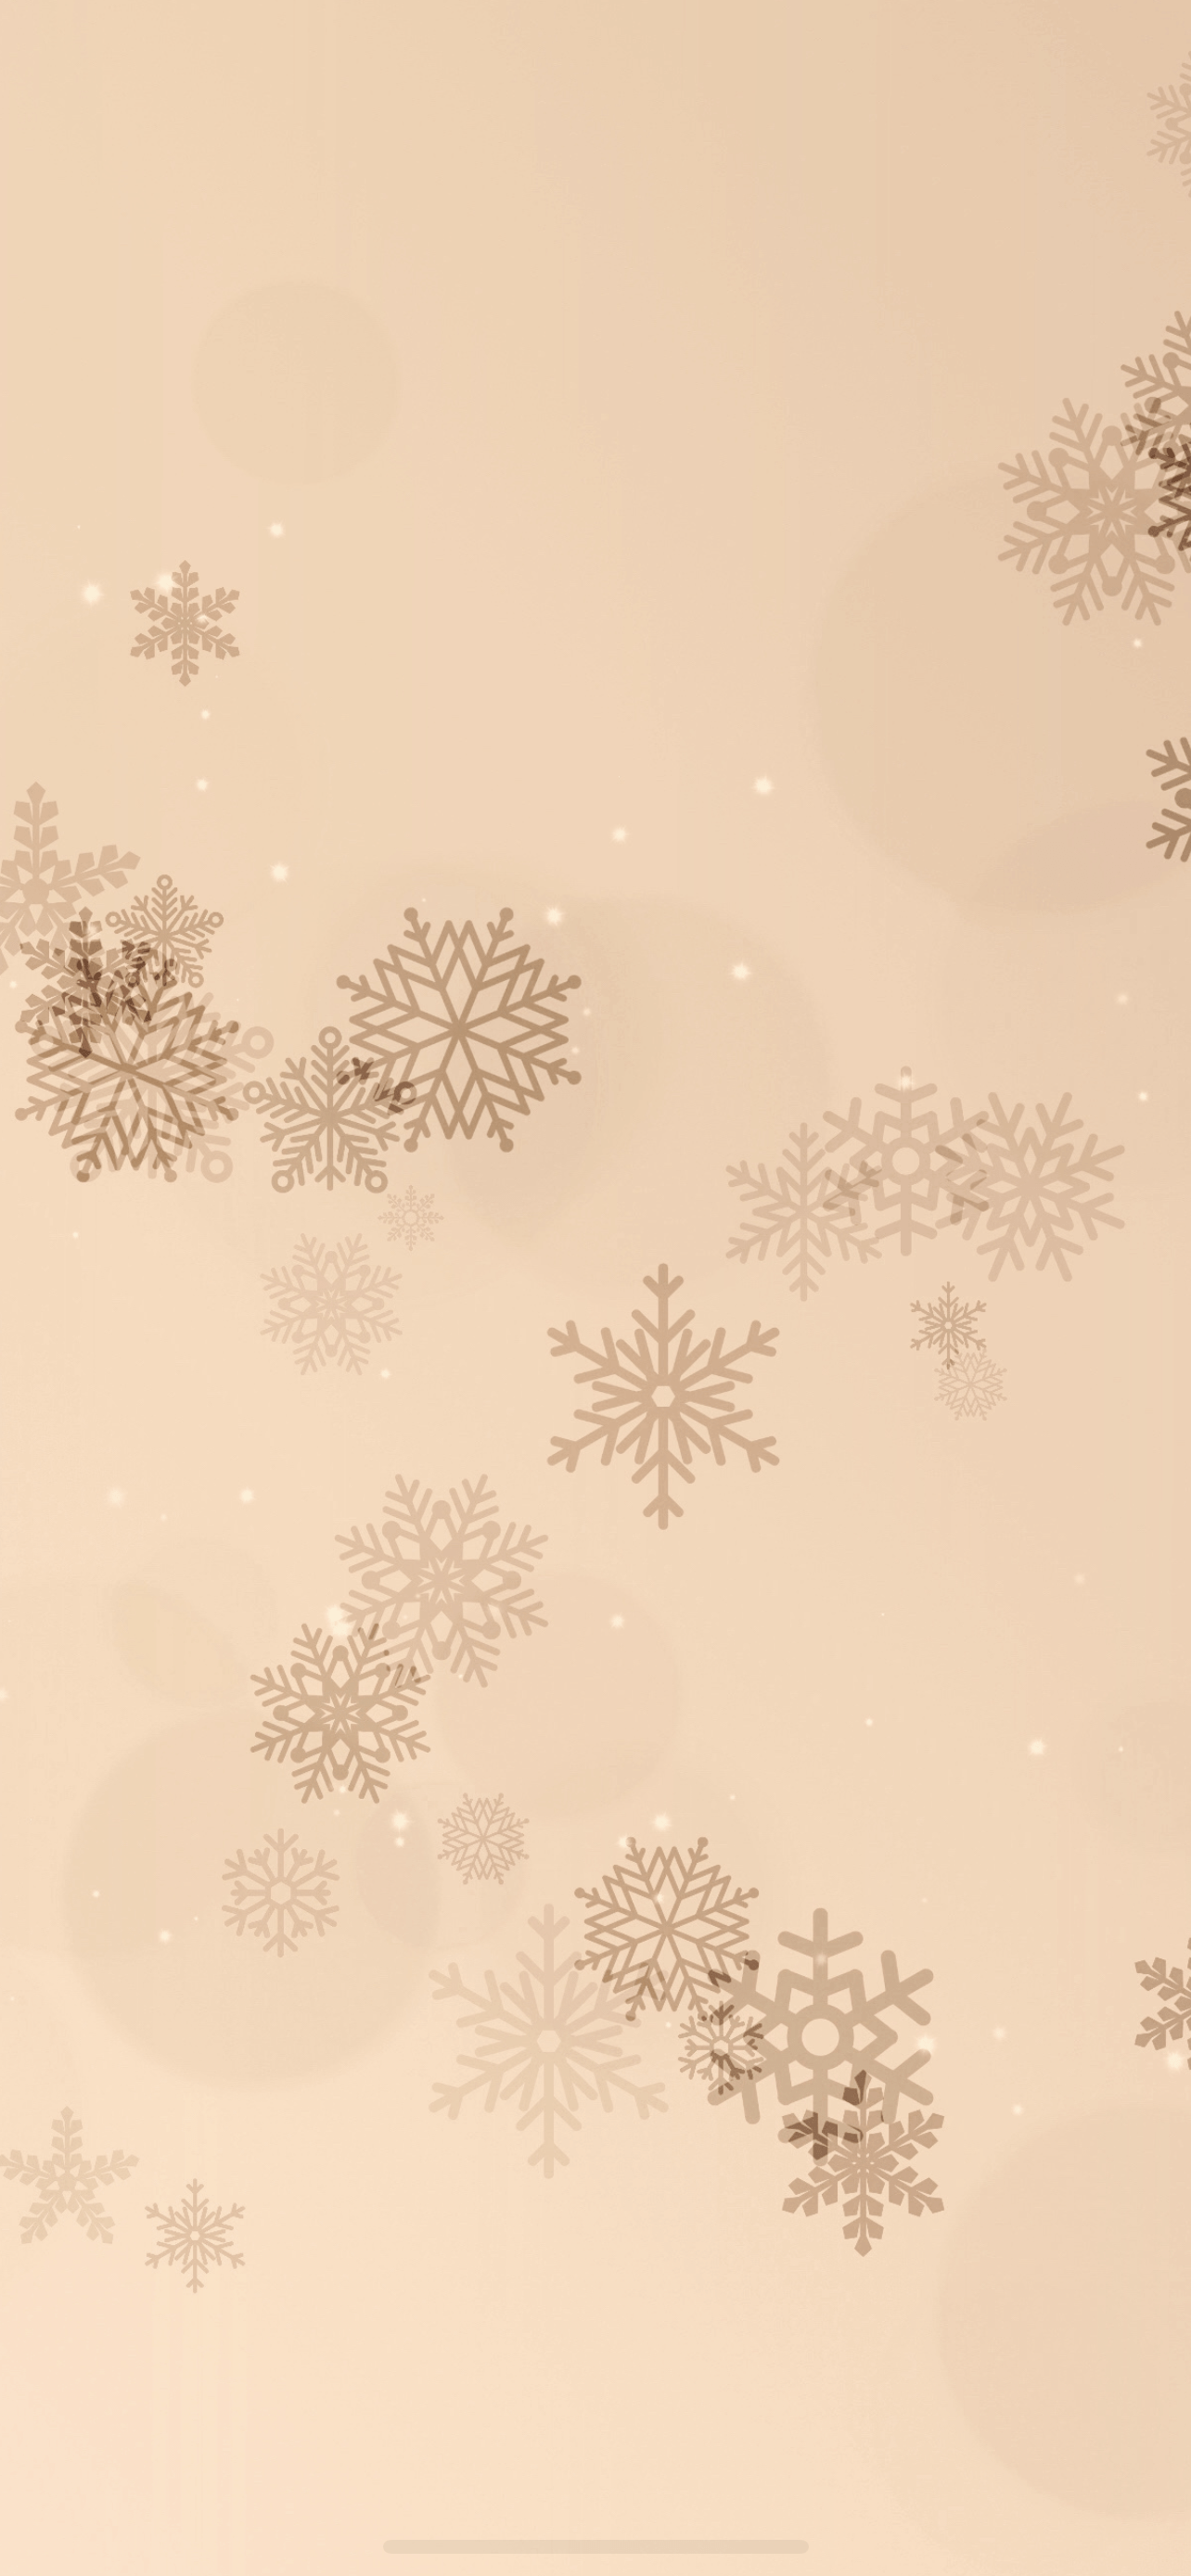 Falling snowflakes wallpaper to match iPhone 13 Pro colors